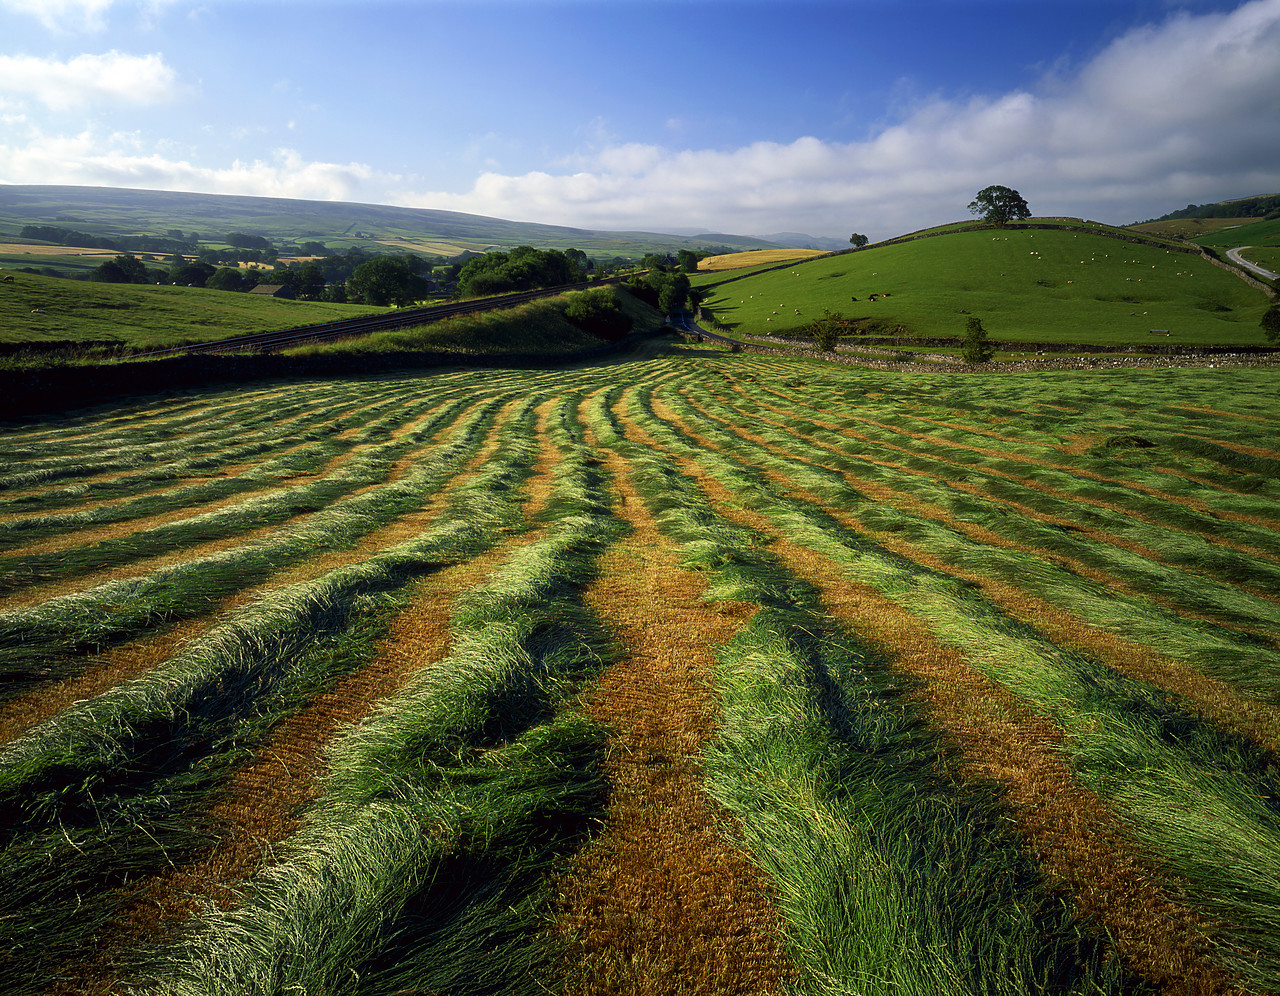 #060779-1 - Rows of Freshly Cut Grass, near Horton in Ribblesdale, North Yorkshire, England